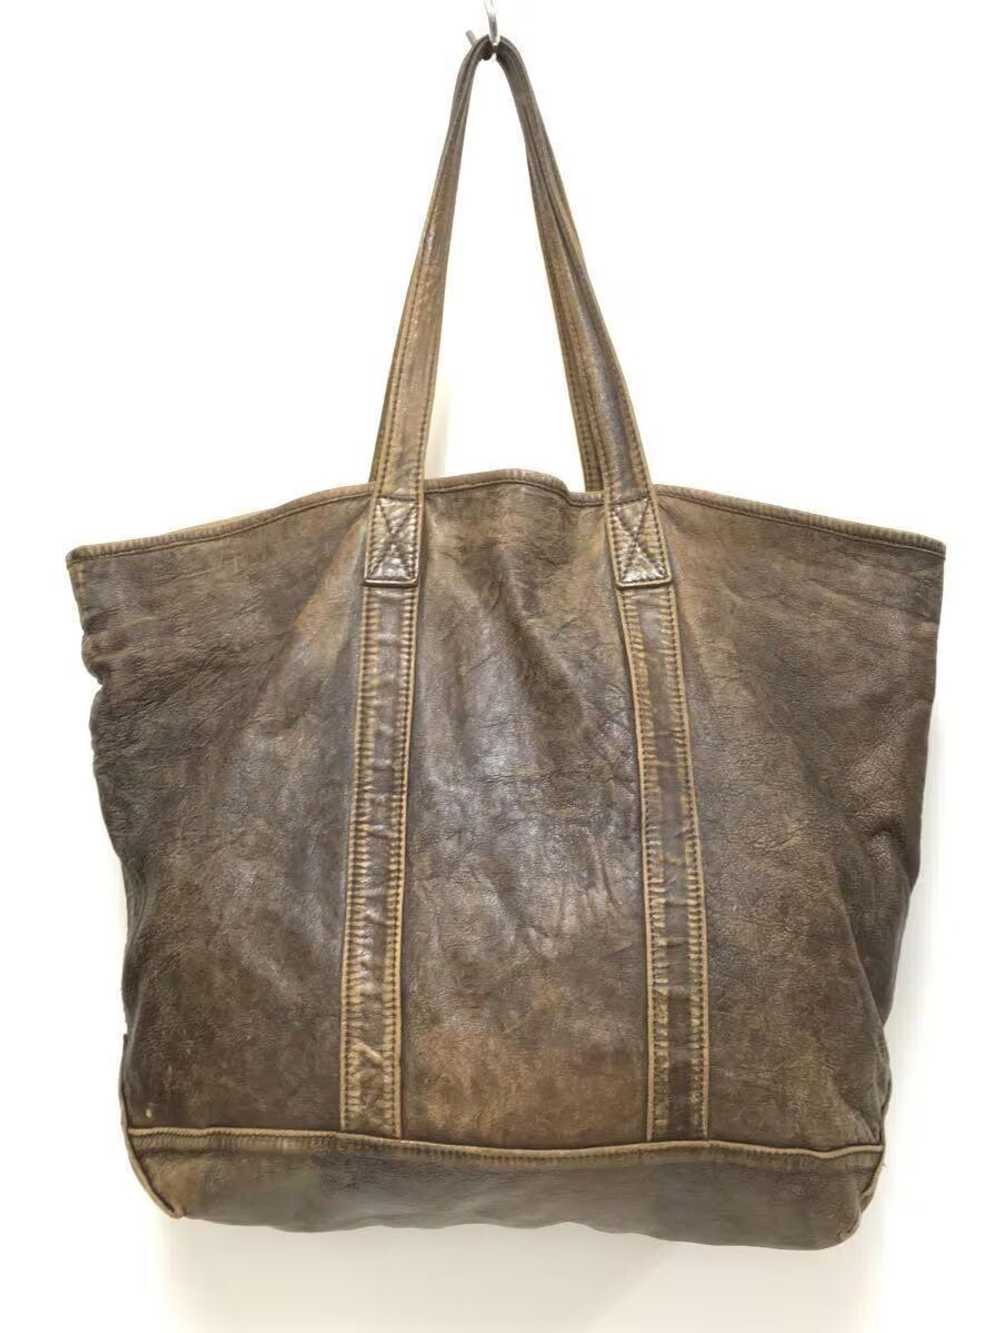 Undercover AW10 "Gira" Leather Tote Bag - image 1